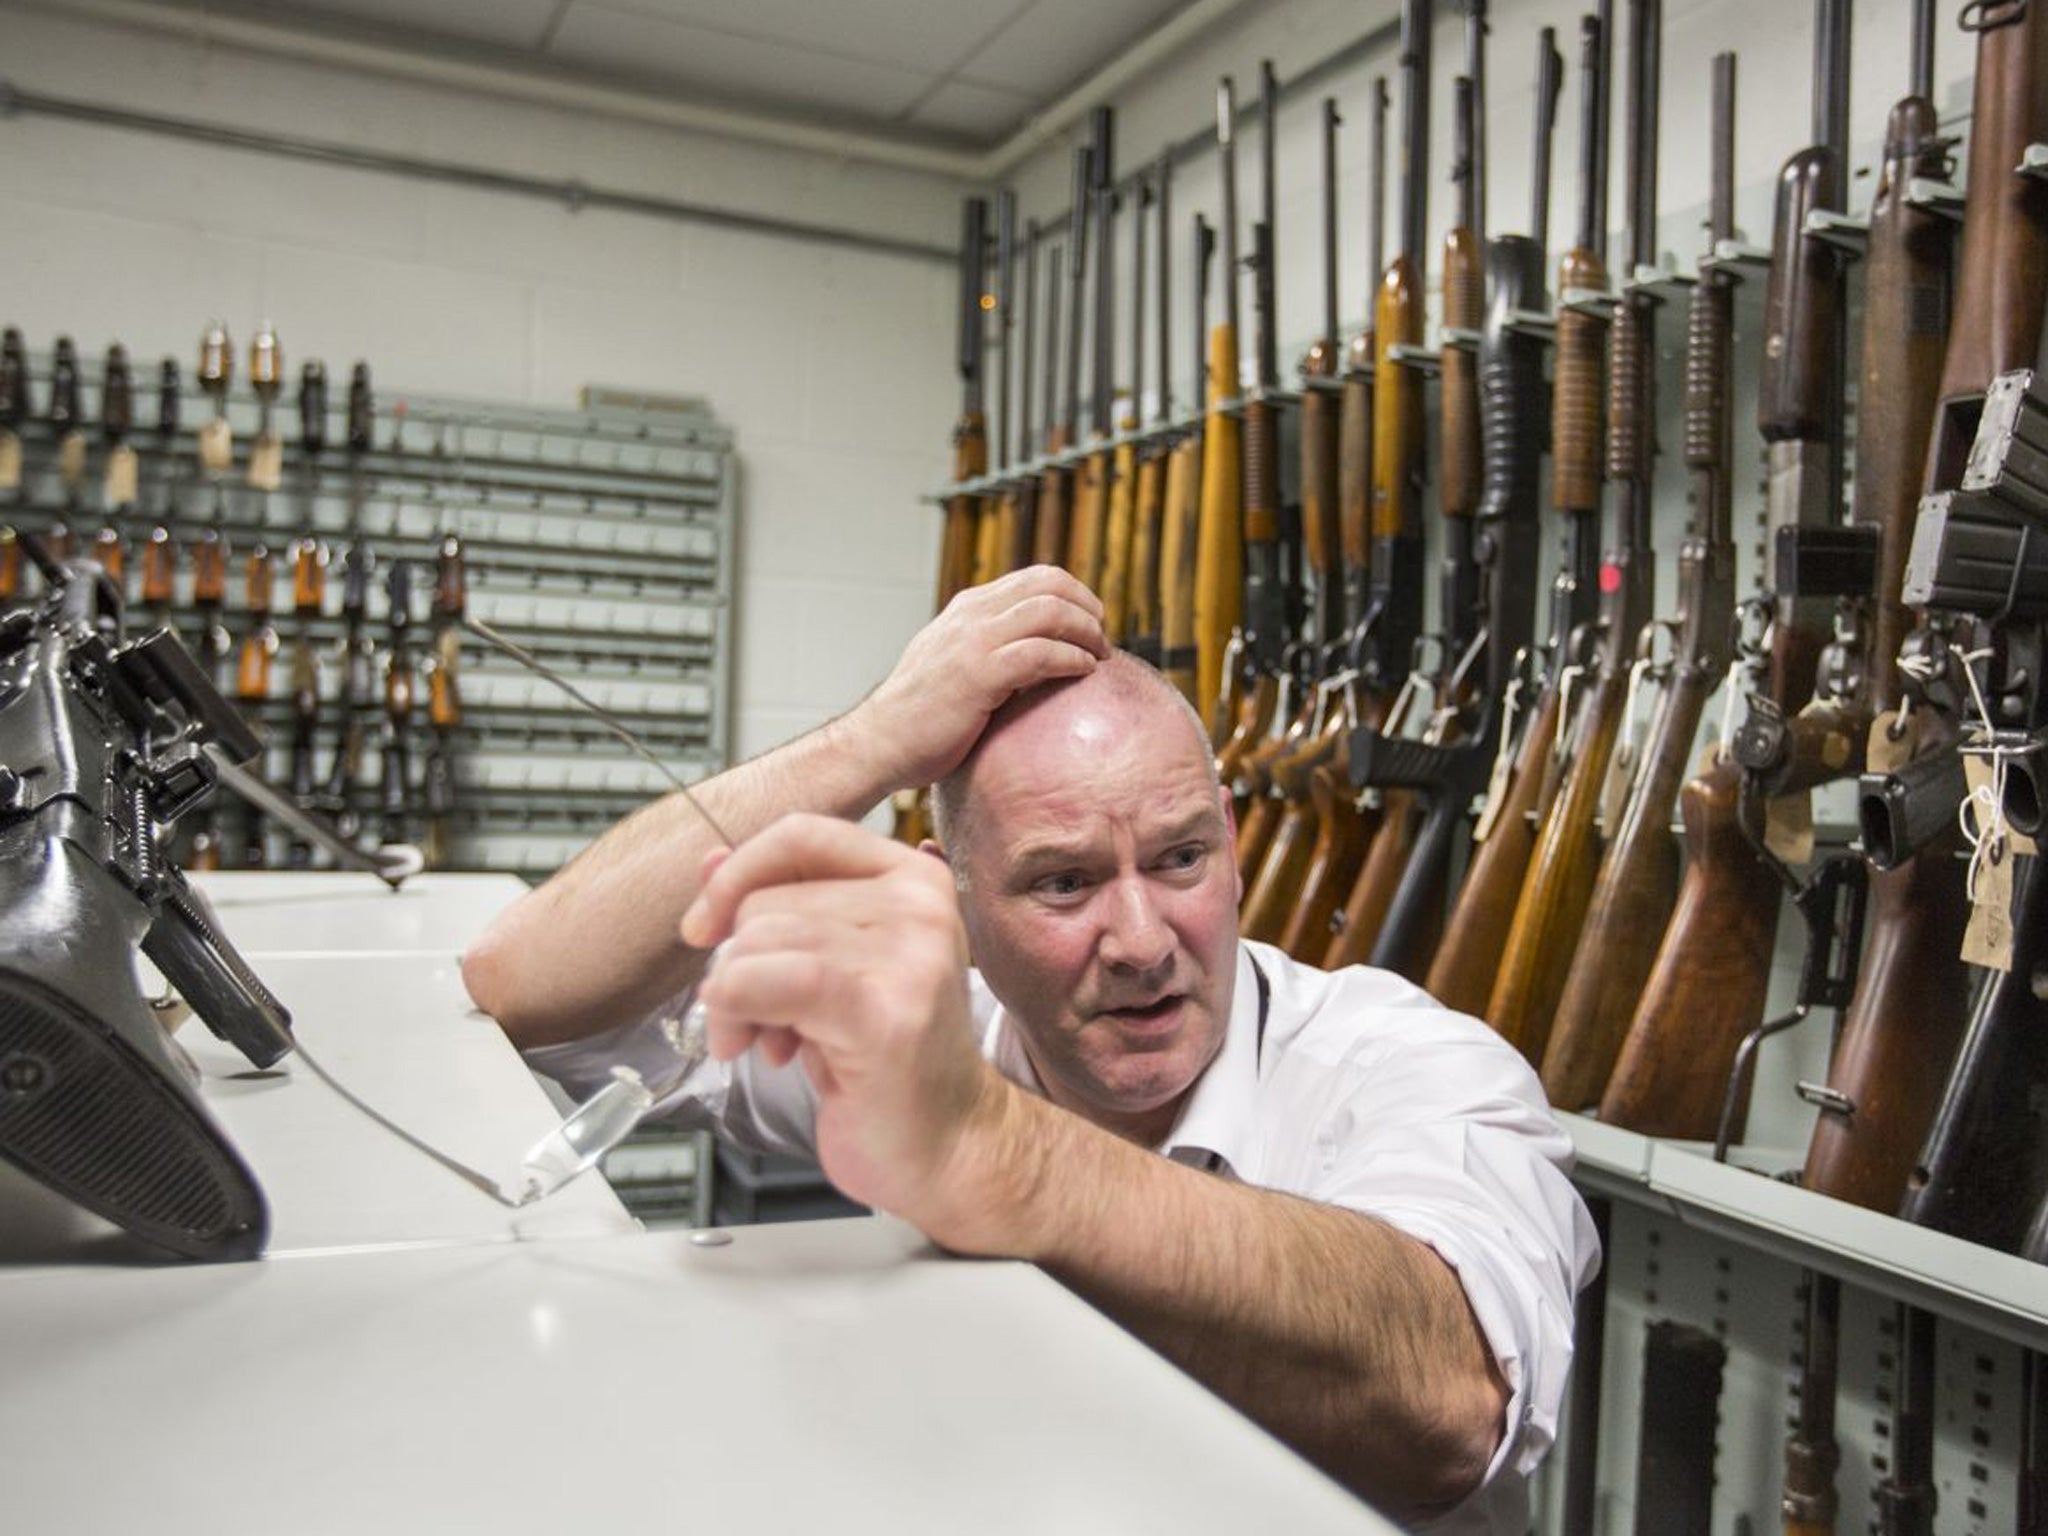 Tony Gallagher, a ballistics expert, in the armoury at the National Ballistics Intelligence Service in Birmingham